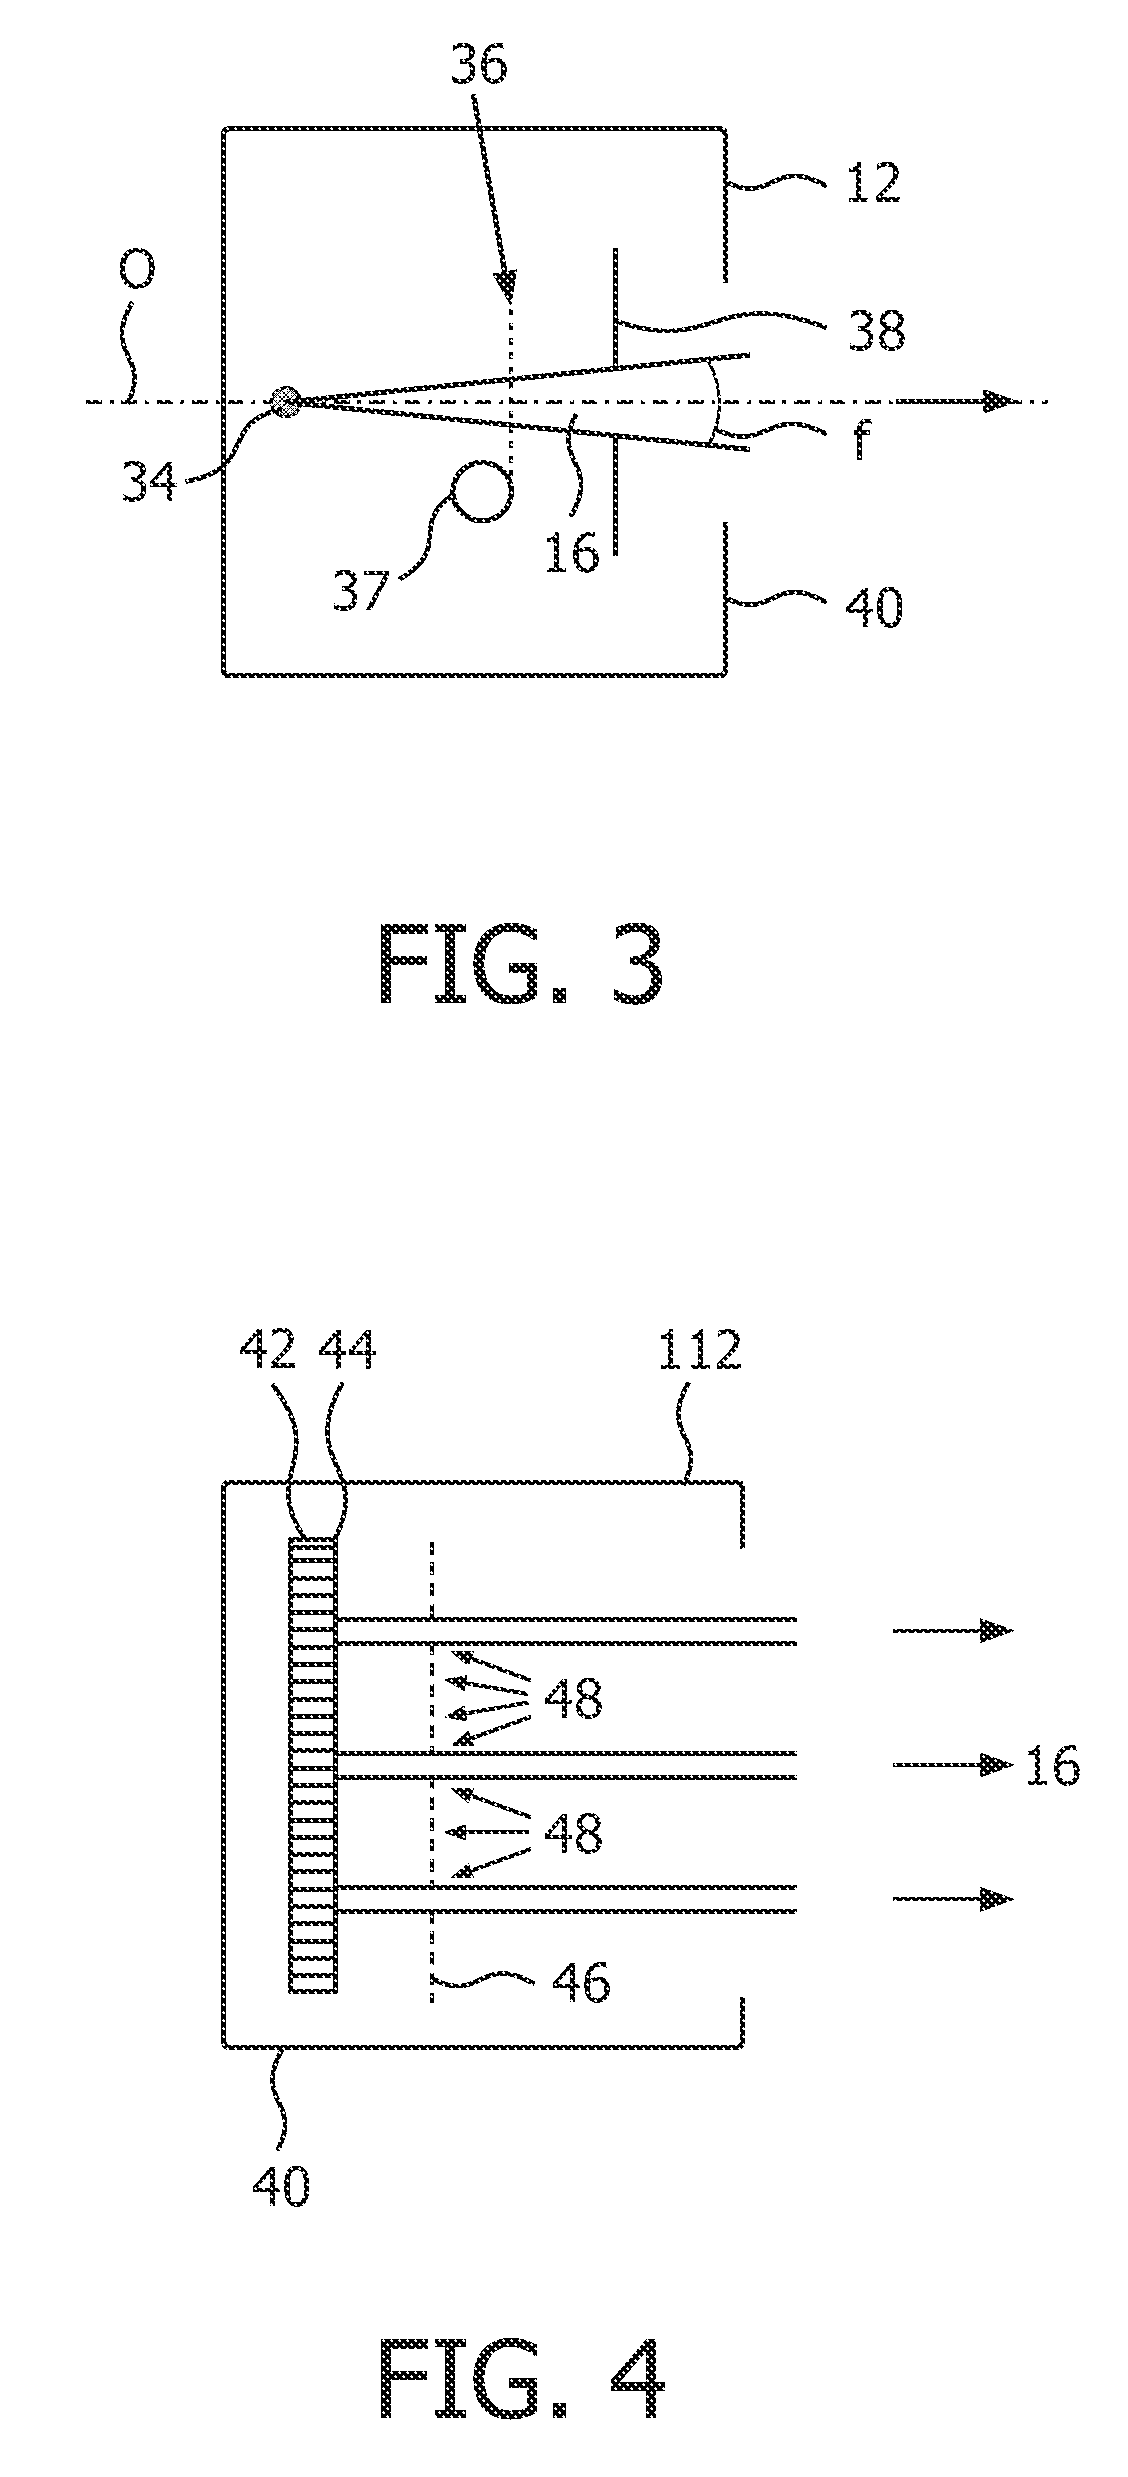 Scanning system for differential phase contrast imaging